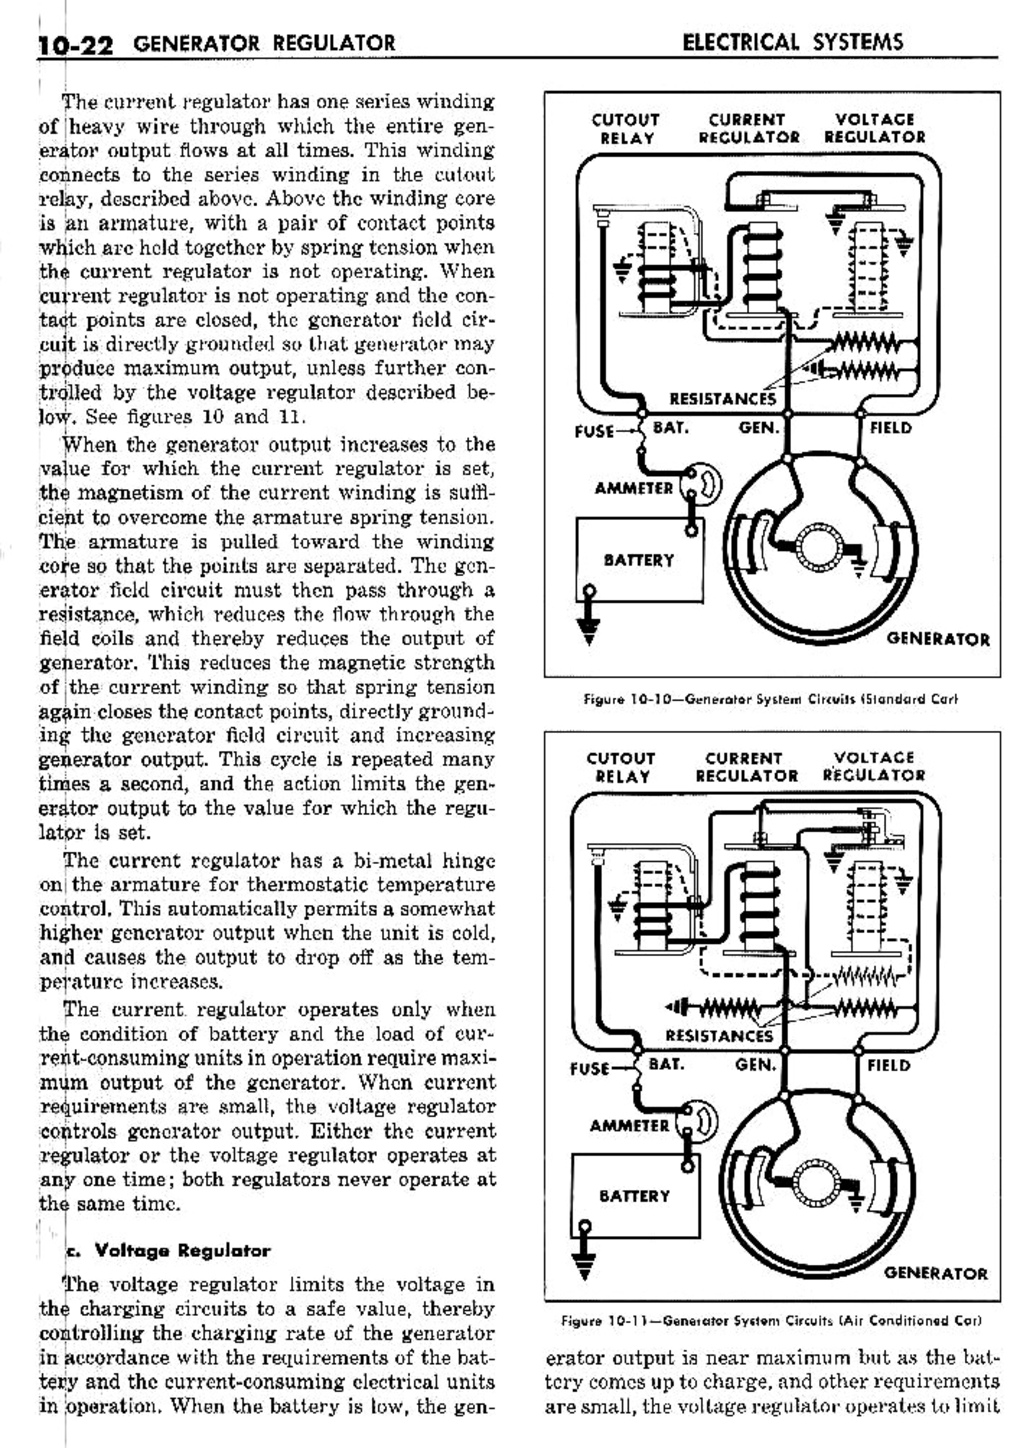 n_11 1959 Buick Shop Manual - Electrical Systems-022-022.jpg